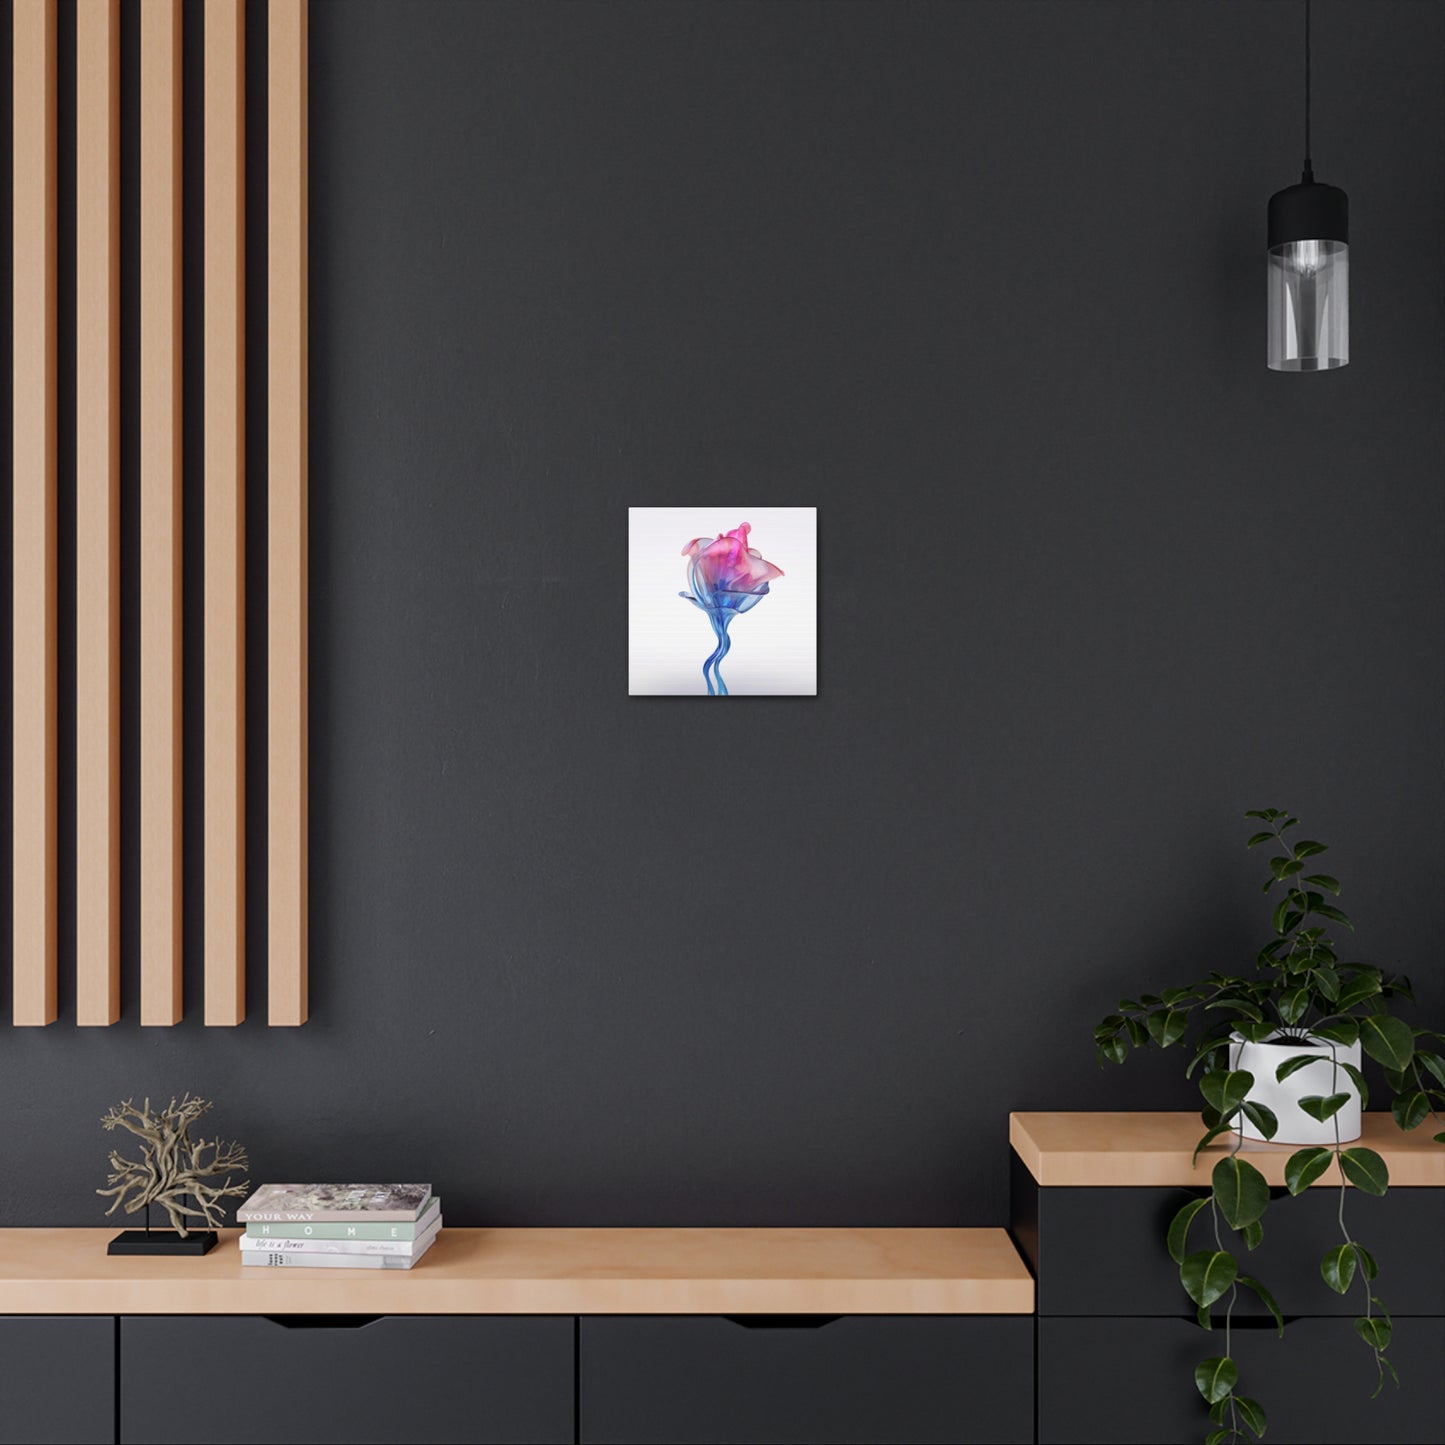 Canvas Gallery Wraps Pink & Blue Tulip Rose 4